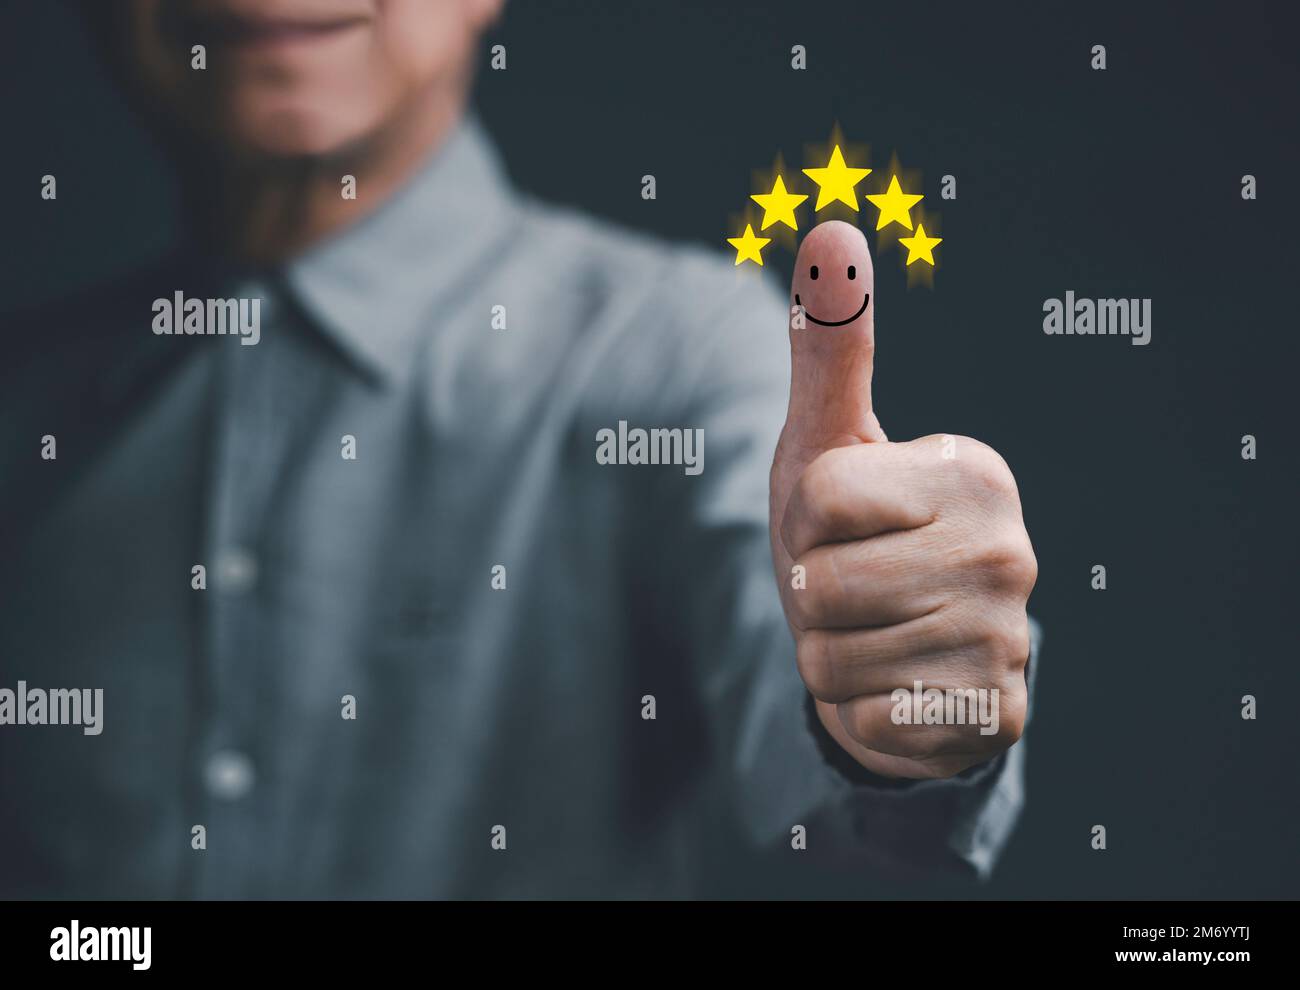 Customer smile and thumb up positive emotion smiley face icon with Five Star Rating. Best Excellent Services for Satisfaction concept. Stock Photo